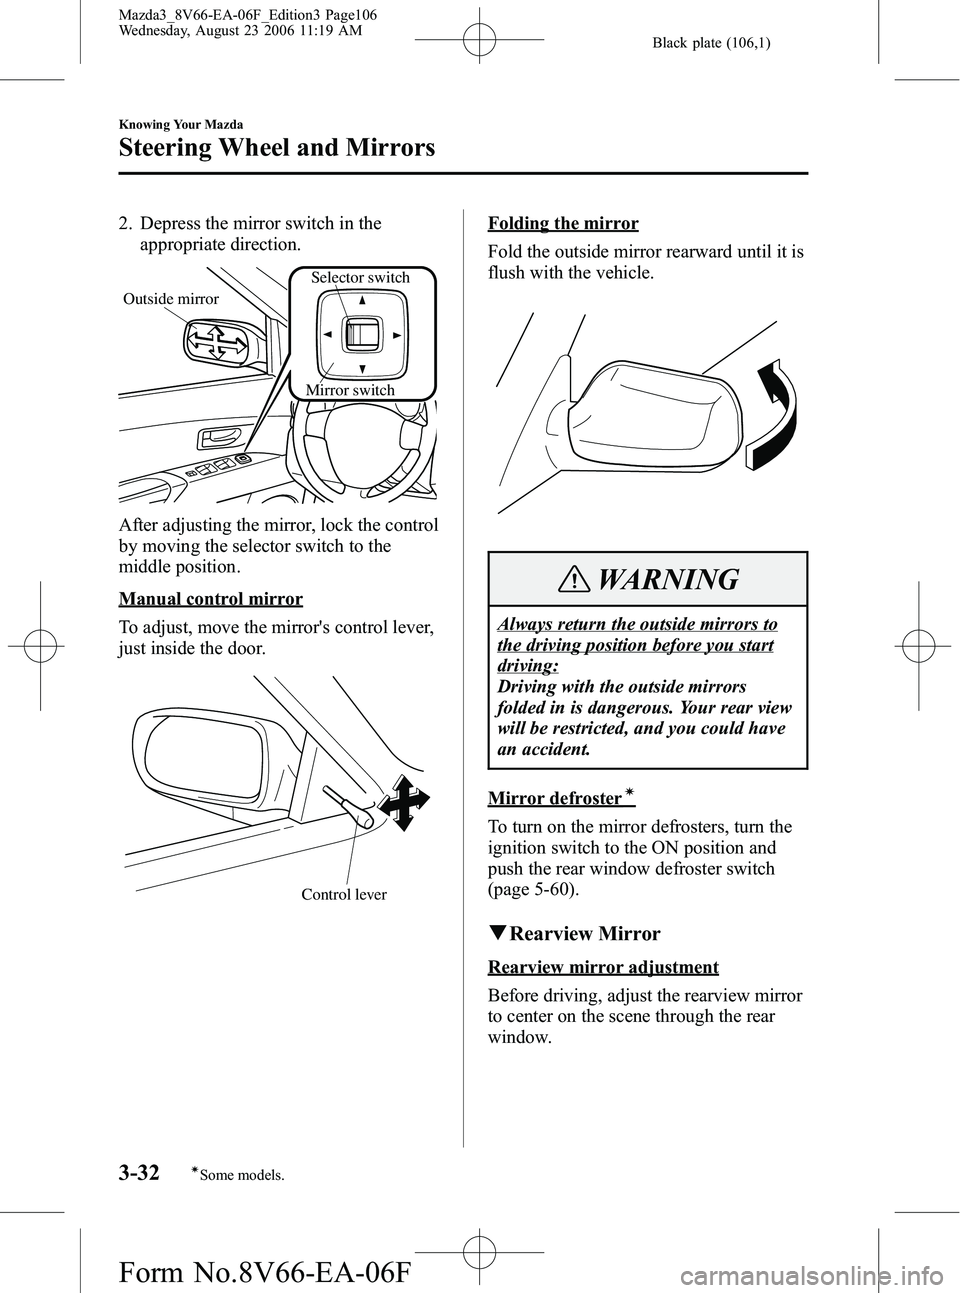 MAZDA MODEL 3 4-DOOR 2007  Owners Manual Black plate (106,1)
2. Depress the mirror switch in theappropriate direction.
Mirror switch
Outside mirror
Selector switch
After adjusting the mirror, lock the control
by moving the selector switch to